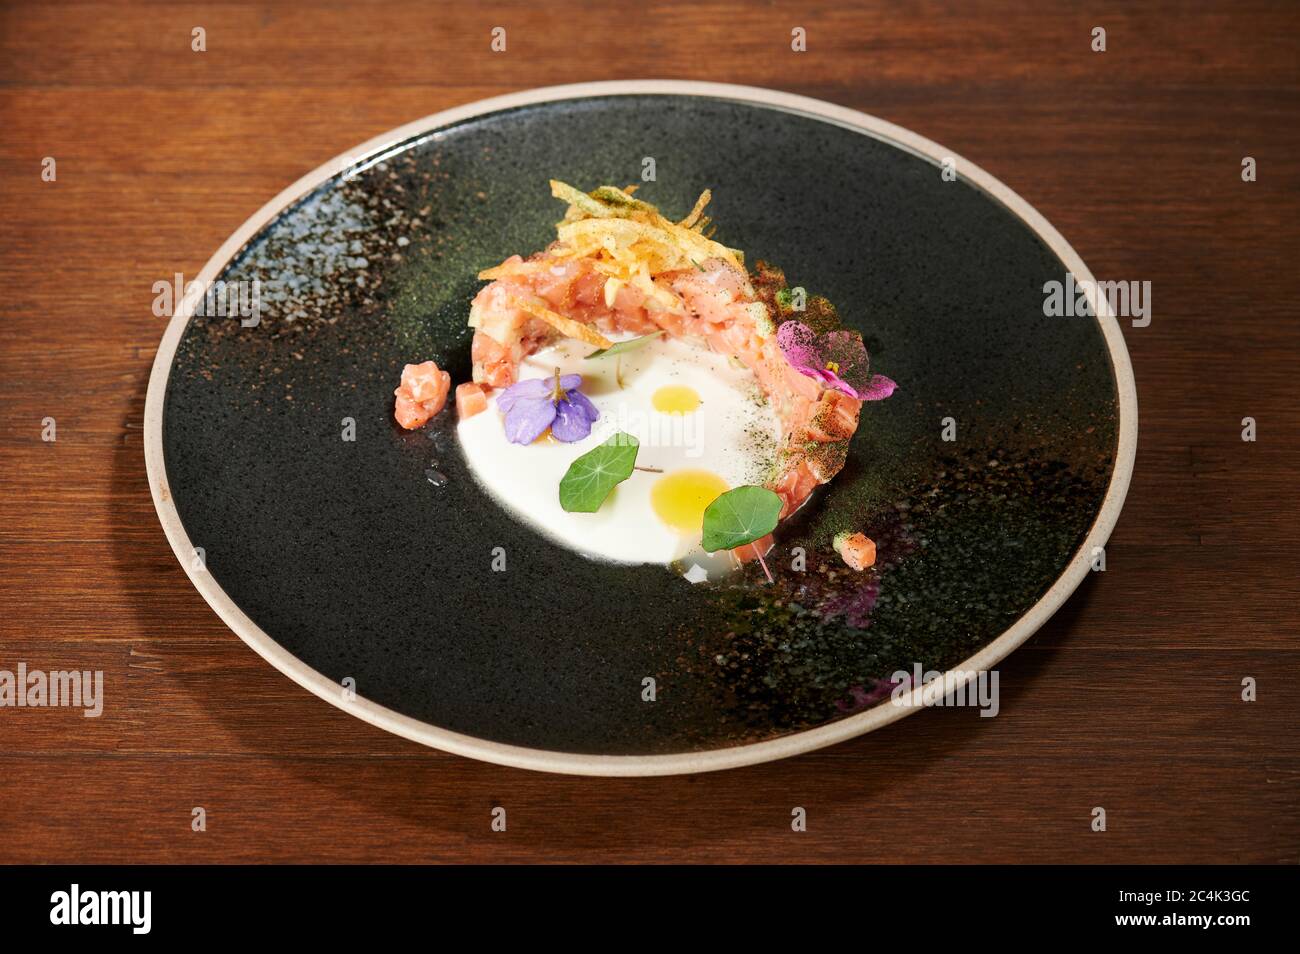 Healthy appetizer salmon tartare with flower pieces perspective view Stock Photo